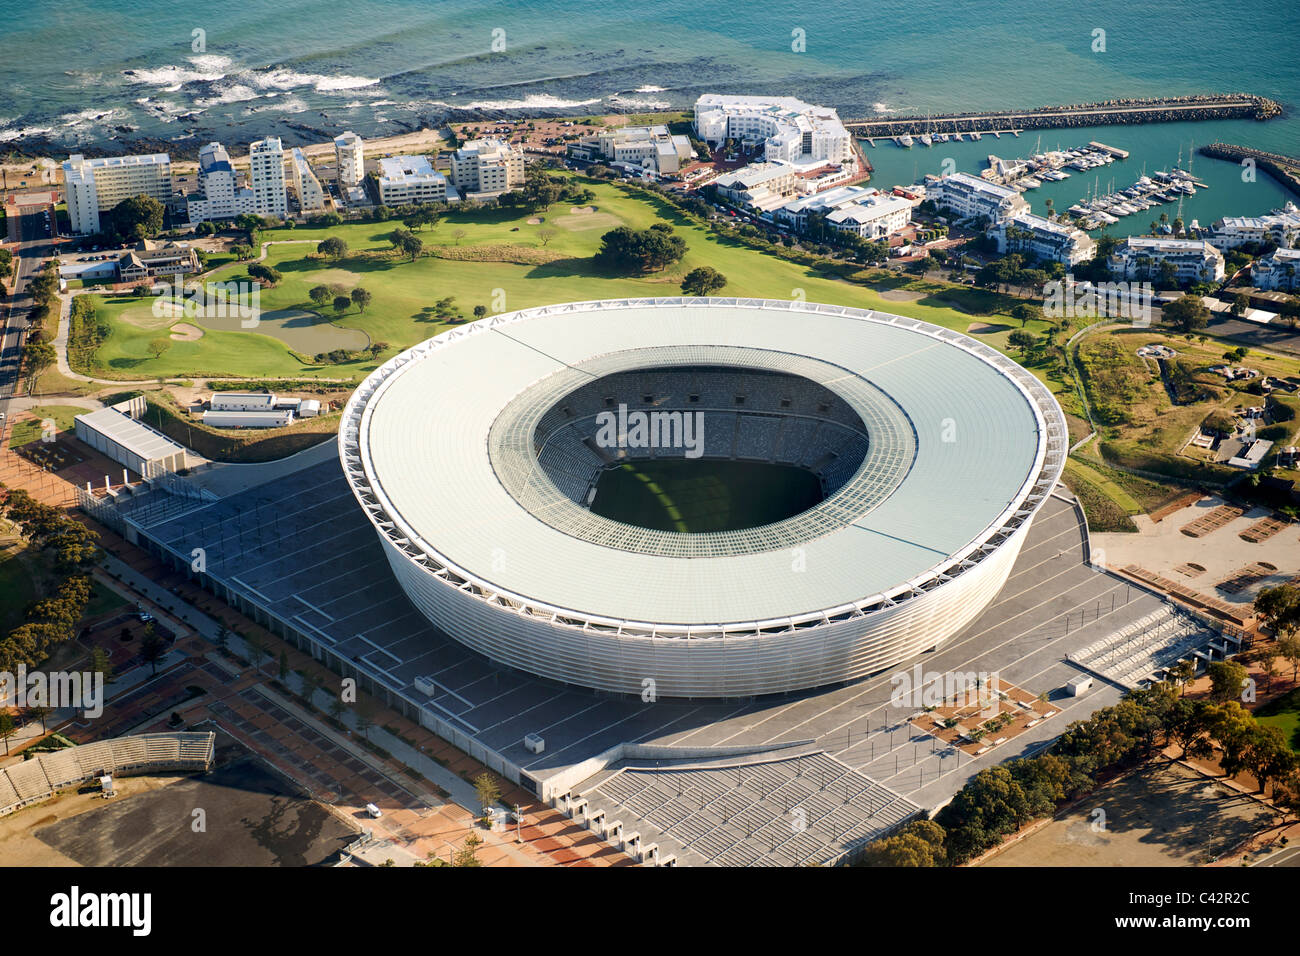 Aerial view of the Green Point stadium in Cape Town, South Africa. Stock Photo